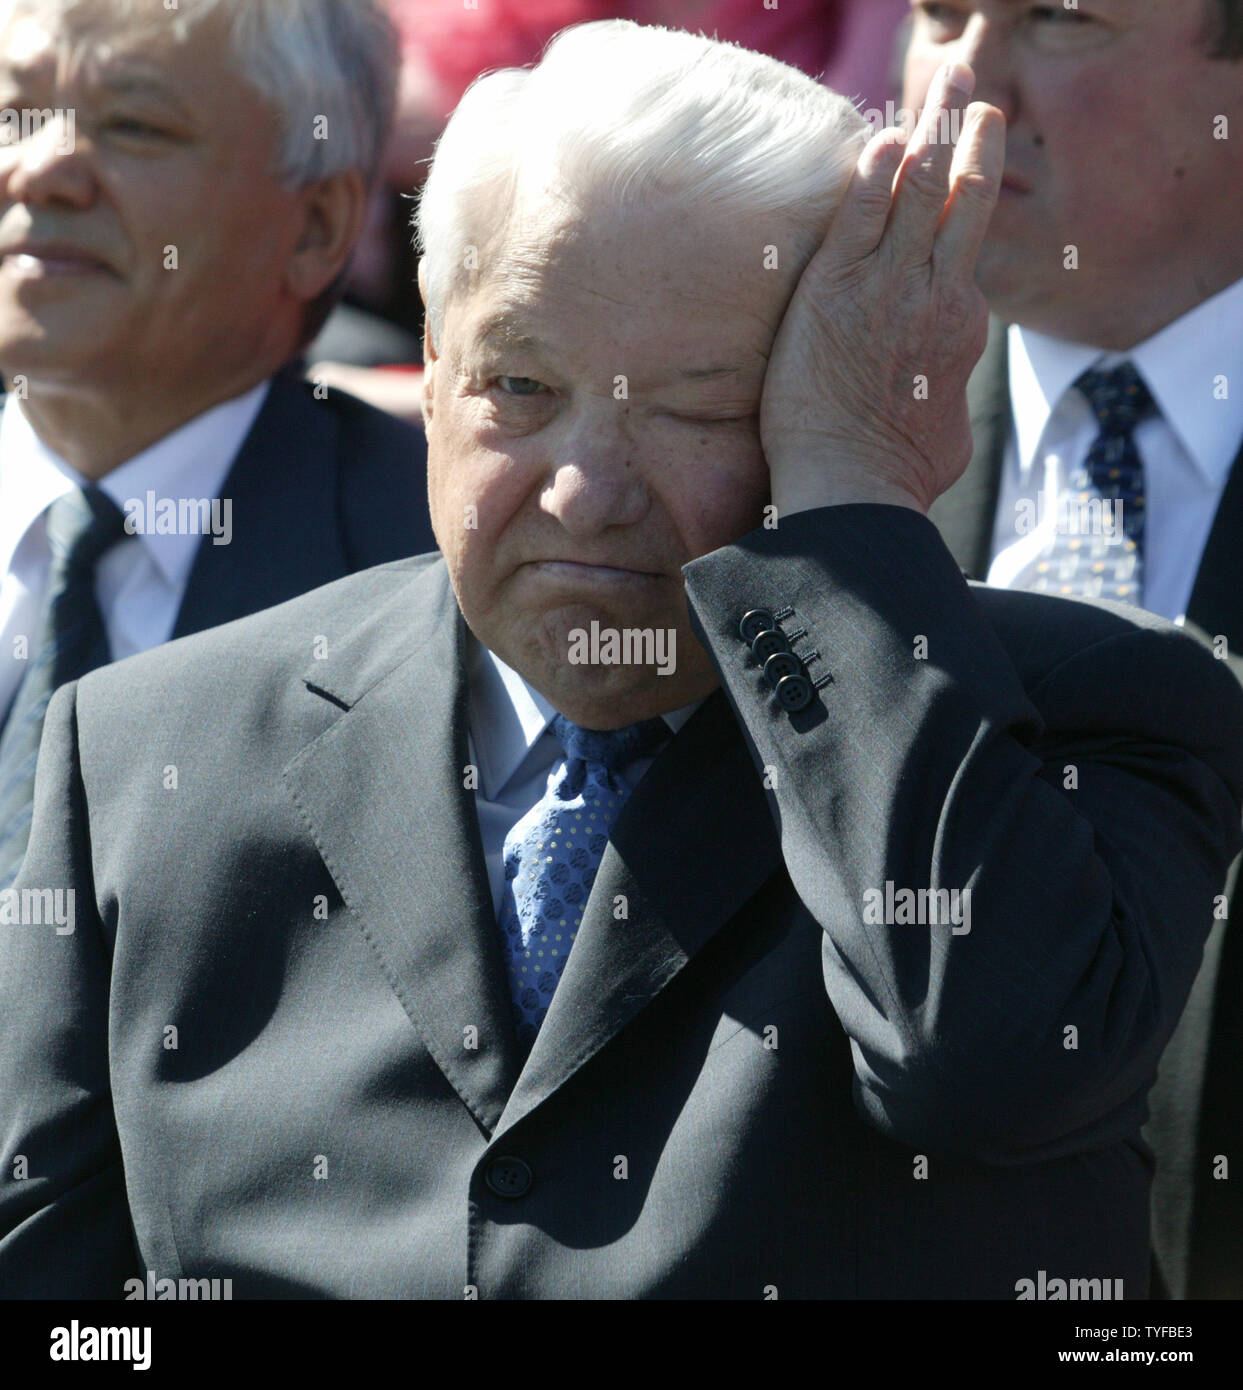 Former Russian President Boris Yeltsin, shown in this 2000 file photo, died at the age of 76 on April 23, 2007 in Moscow. Yeltsin pushed Russia to democracy and a market economy after helping in the collapse of the Soviet Union communist state in 1991. In this file photo, Former Russian President Boris Yeltsin attends a celebration of Would War II victory at the Red Square in Moscow Kremlin on May 9, 2004. (UPI Photo/Anatoli Zhdanov) Stock Photo